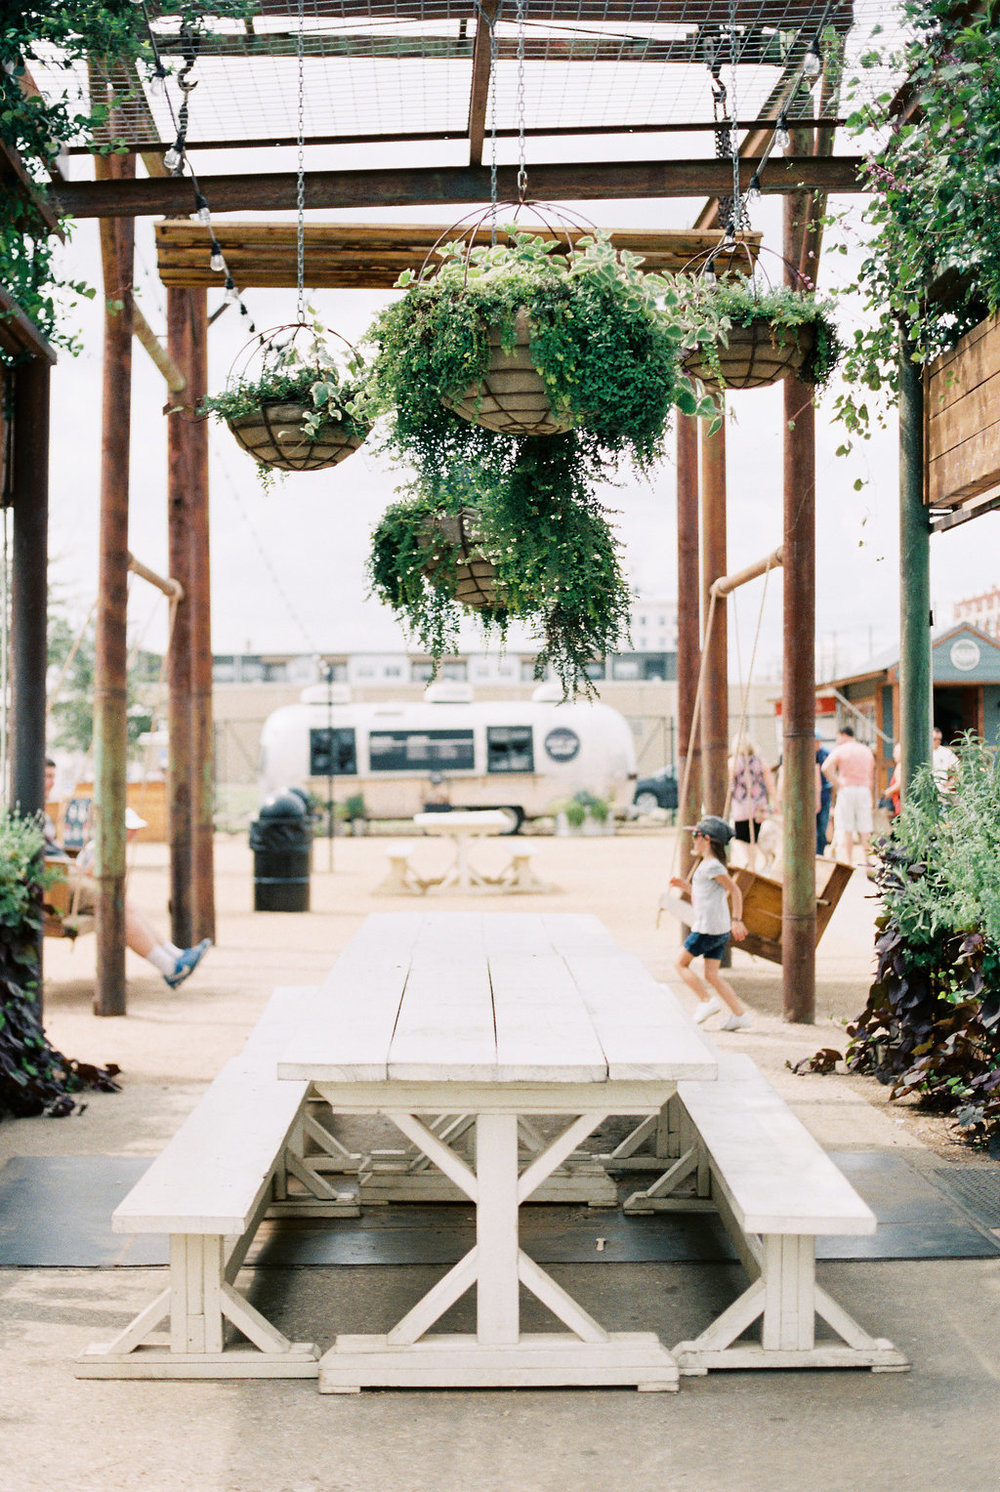 The 7 Things You Must Do at Magnolia Market on Cottage HIll | cottagehill.co29.jpg